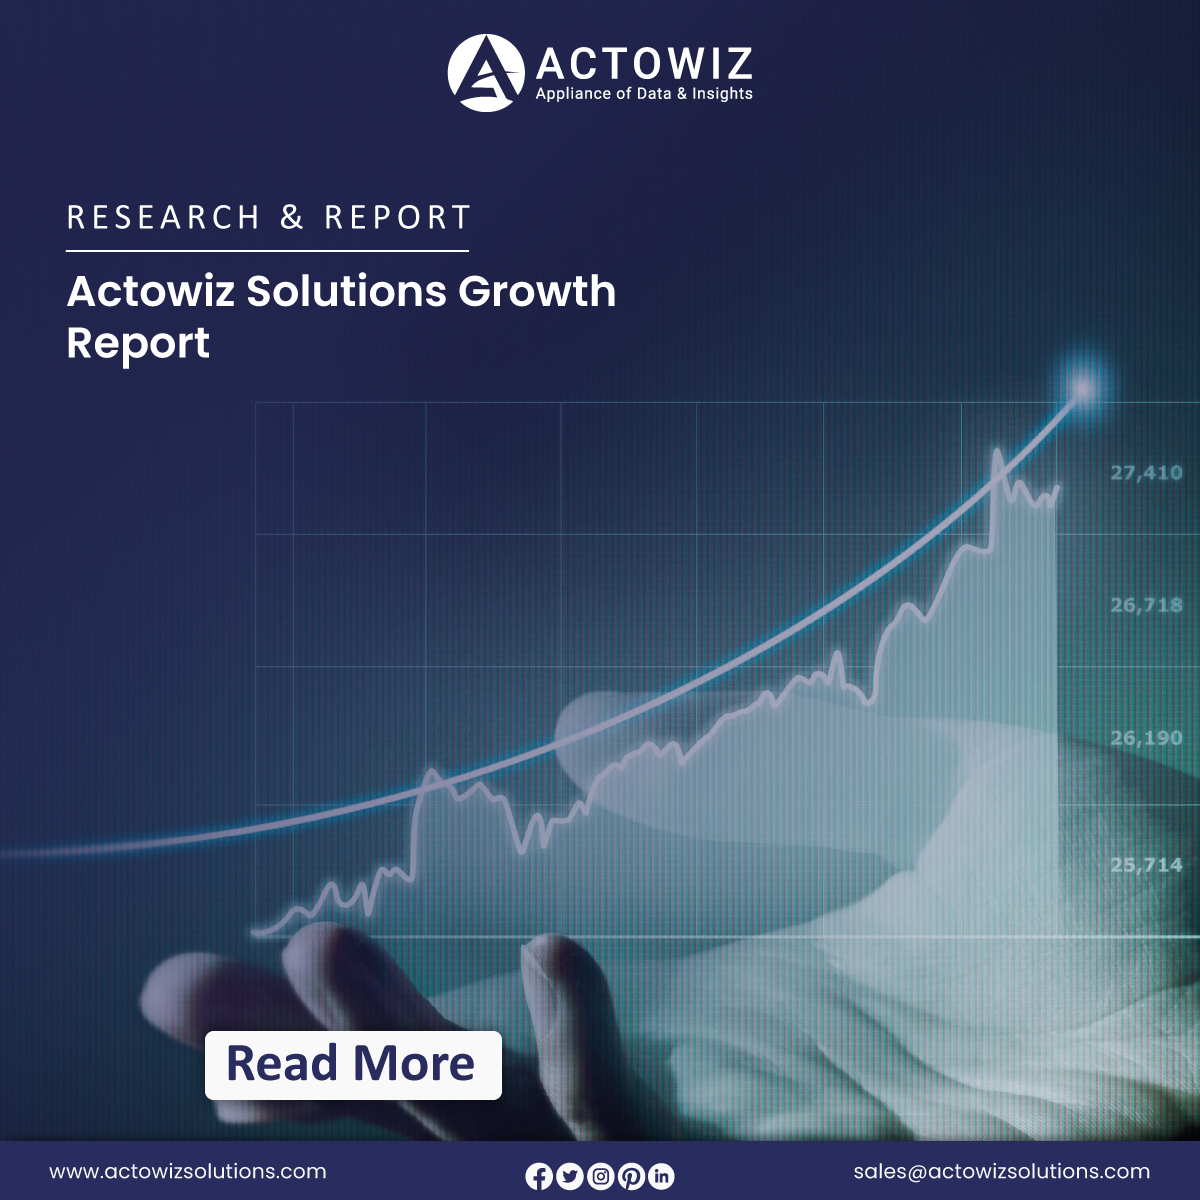 #ActowizSolutions: Empowering Growth Through Innovative Solutions. Discover our latest achievements & milestones in our growth report. actowizsolutions.com/actowiz-soluti… #ActowizSolutionsGrowthReport #ClientBaseGrowth #ProjectCompletionGrowth #RetailTechnologyAchievements #usa #uk #uae